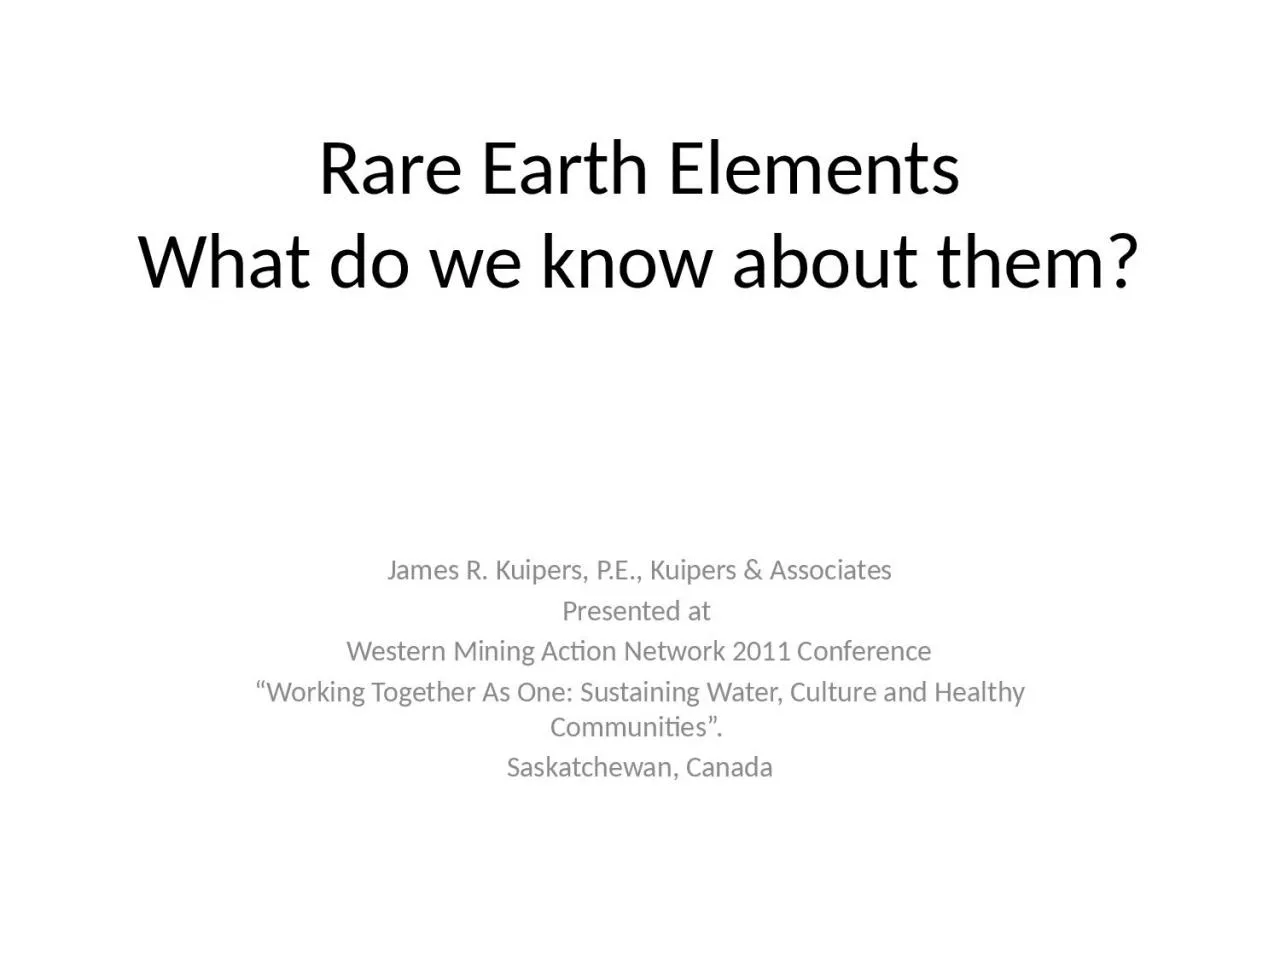 Rare Earth Elements What do we know about them?